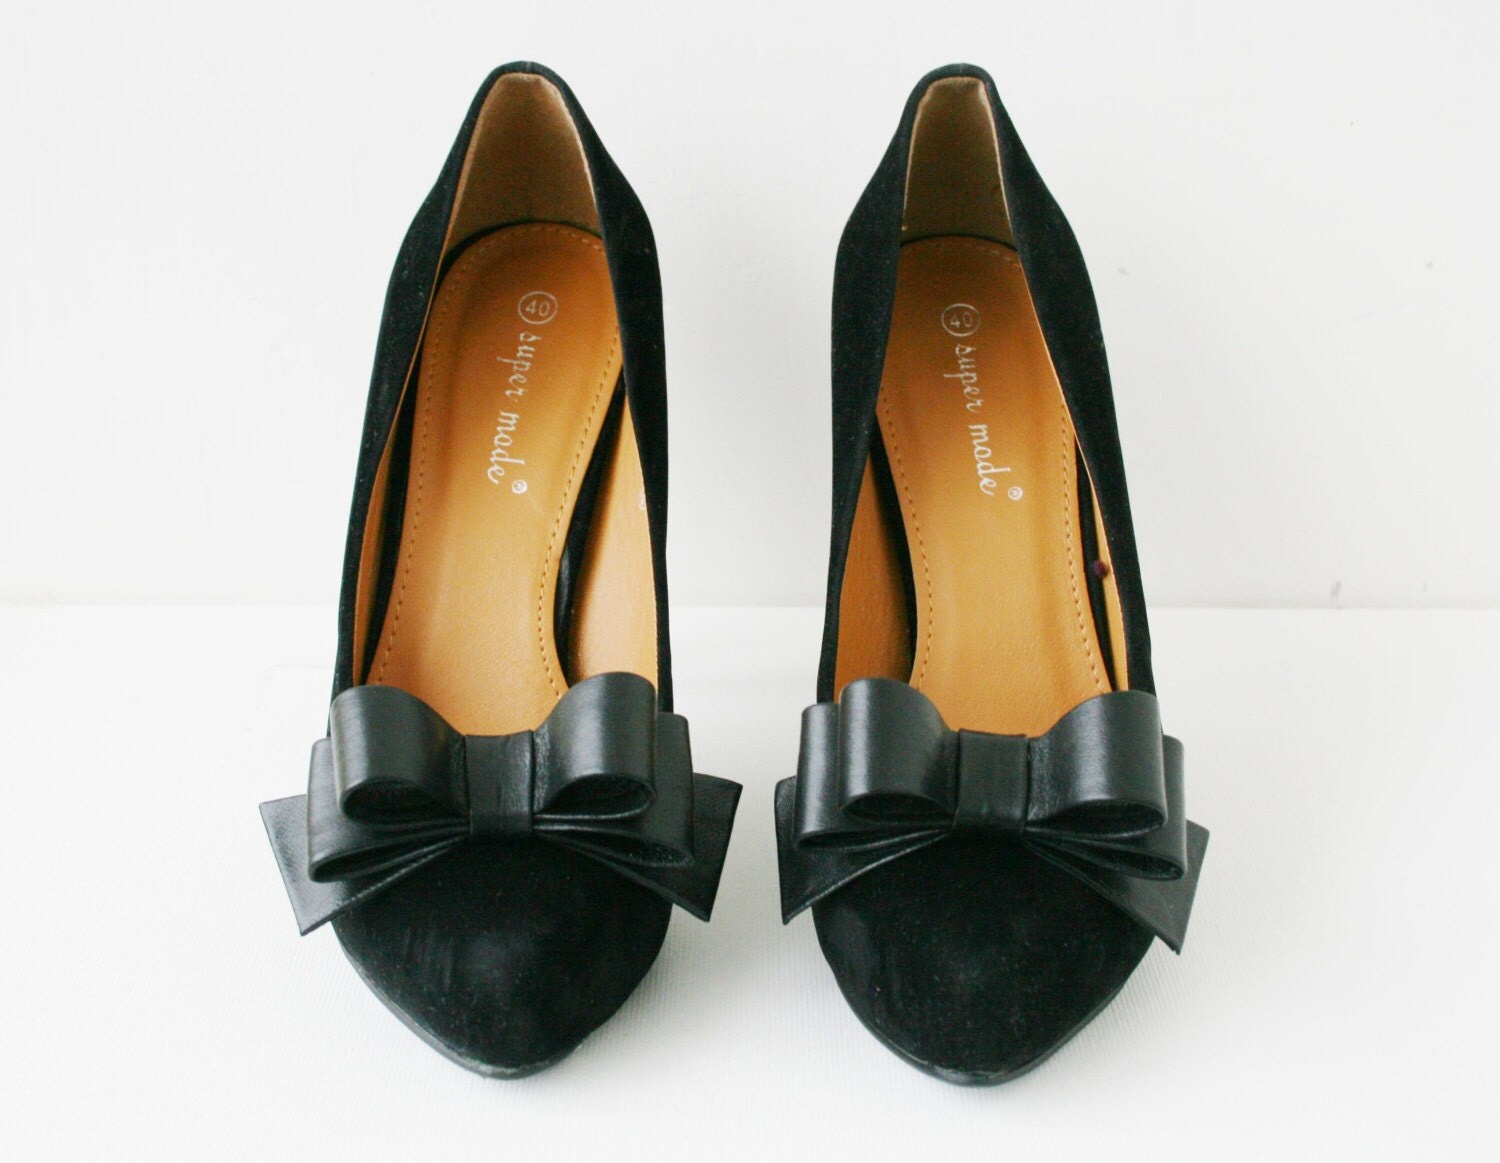 Black Leather Bow Shoe Clips by leasstudio on Etsy